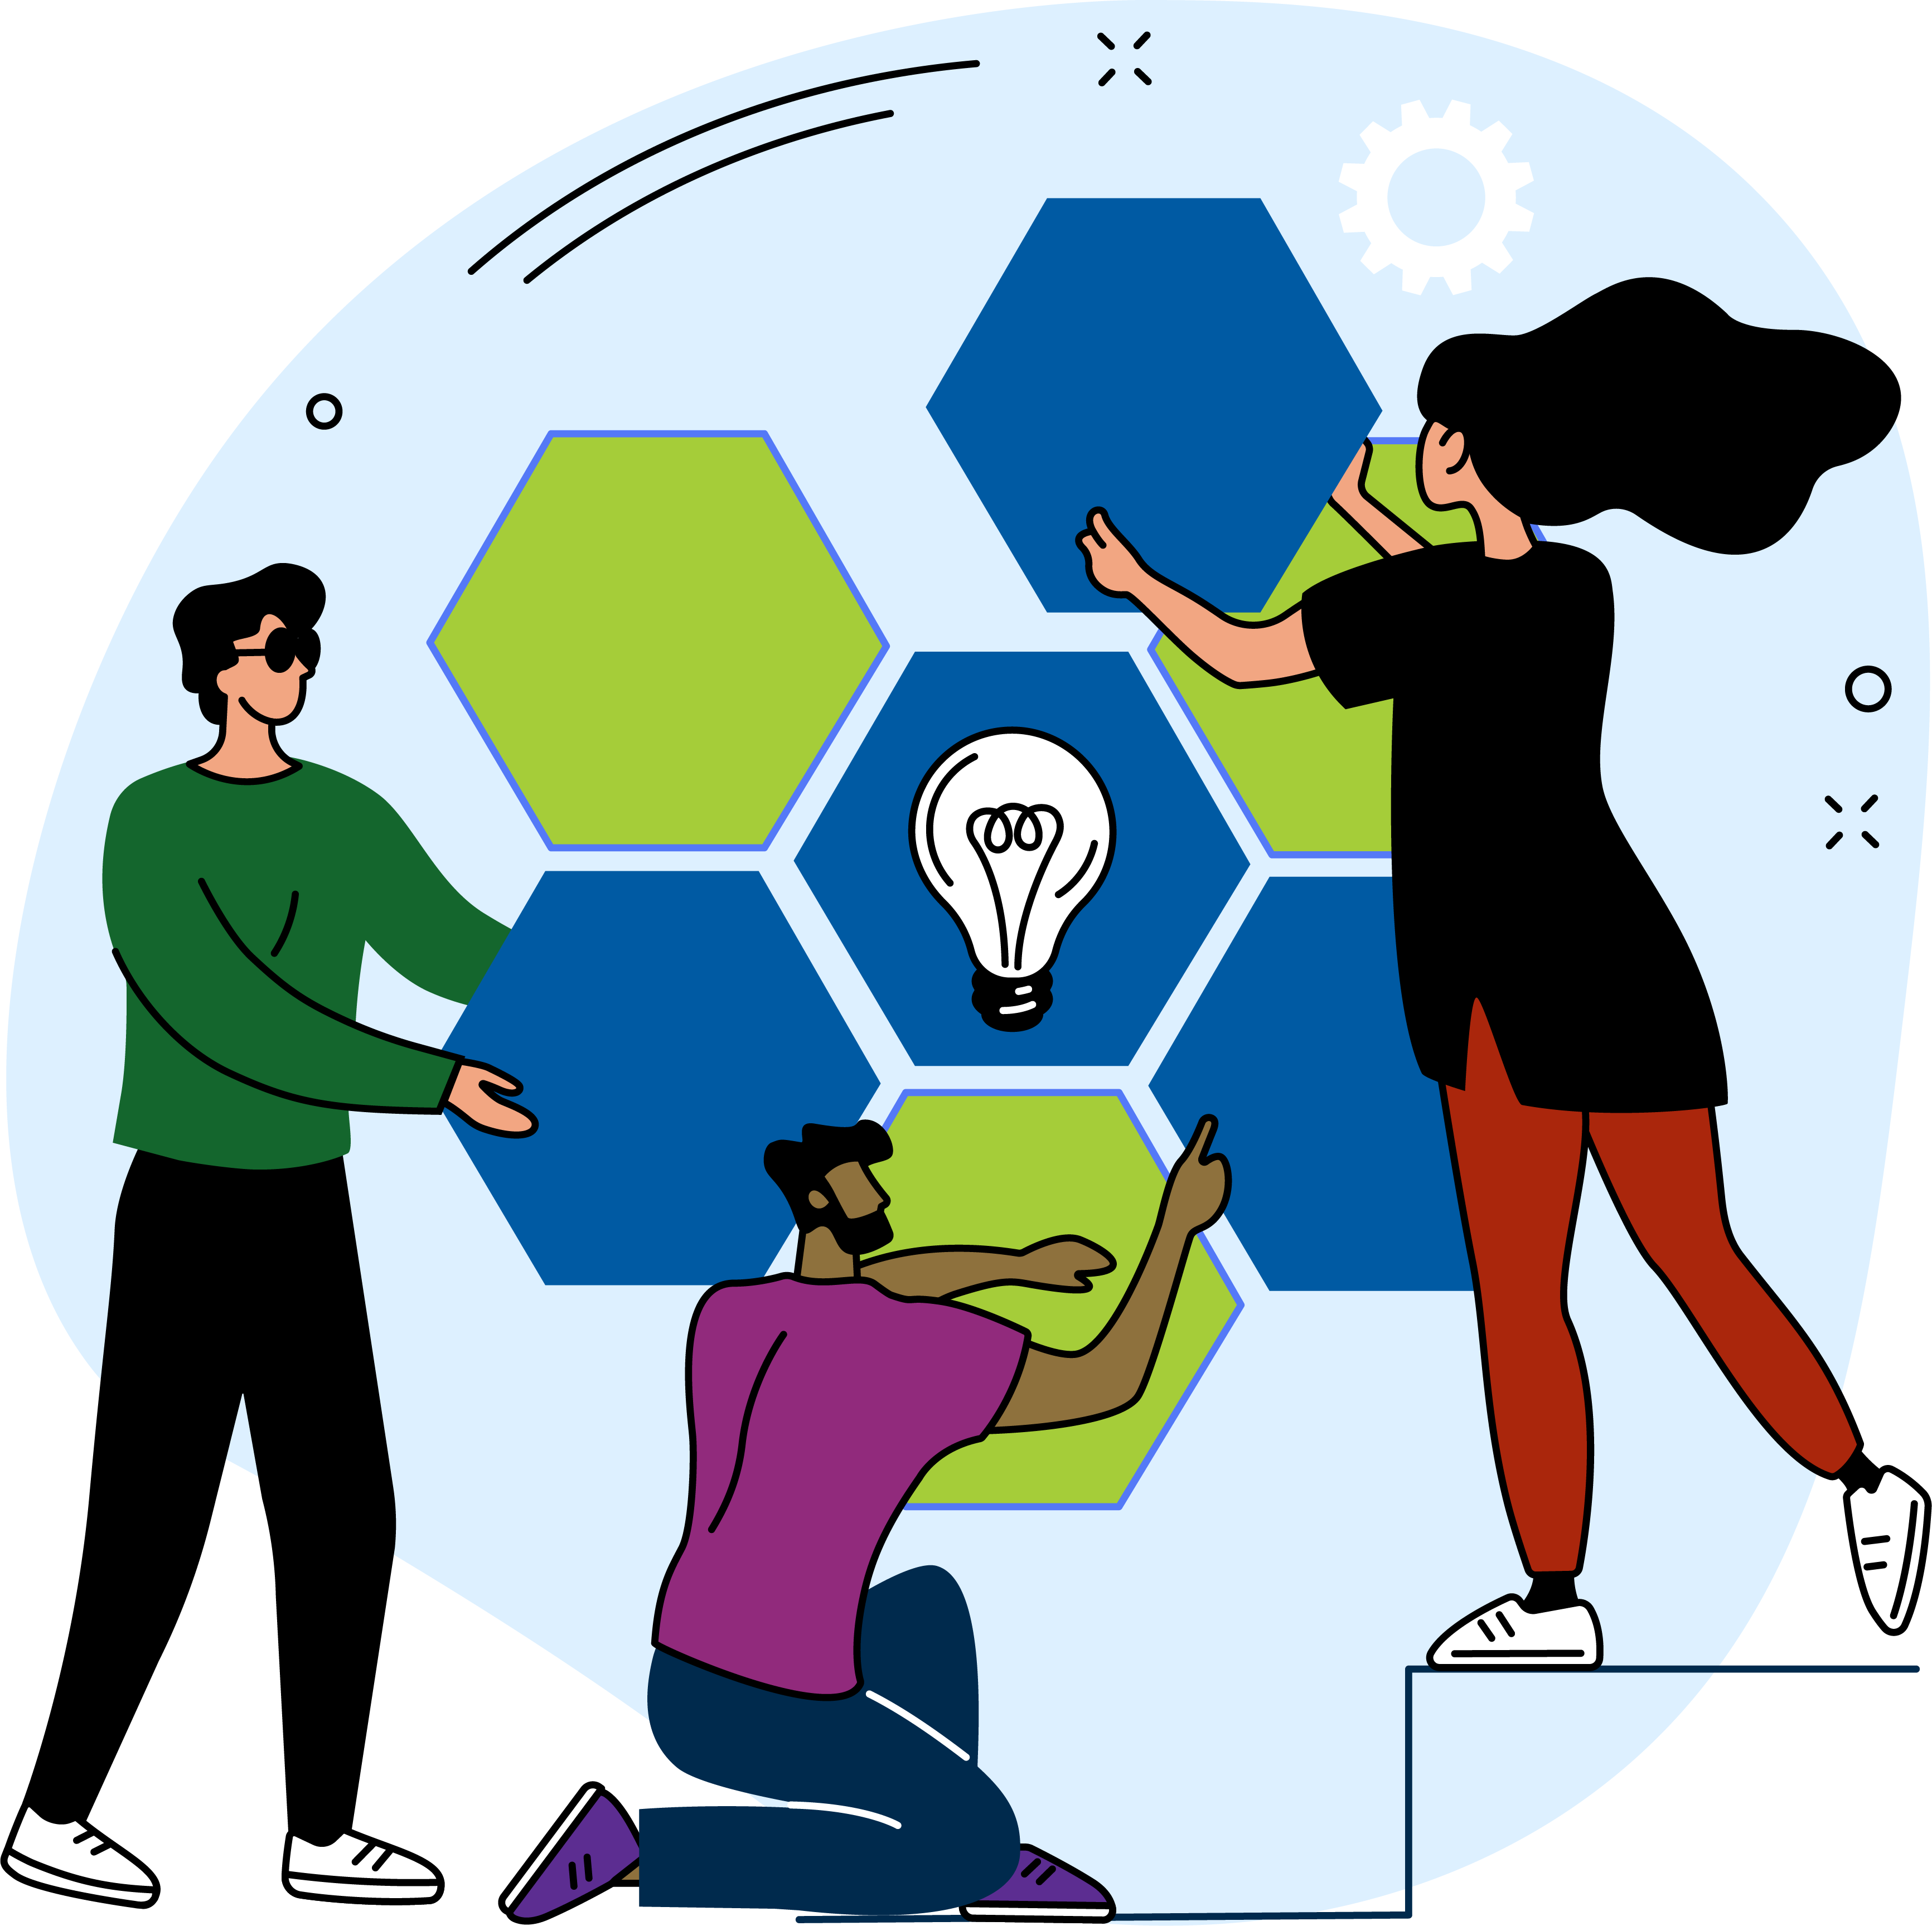 Illustration of three people assembling some hexagons together. One of the hexagons has a light bulb design on it